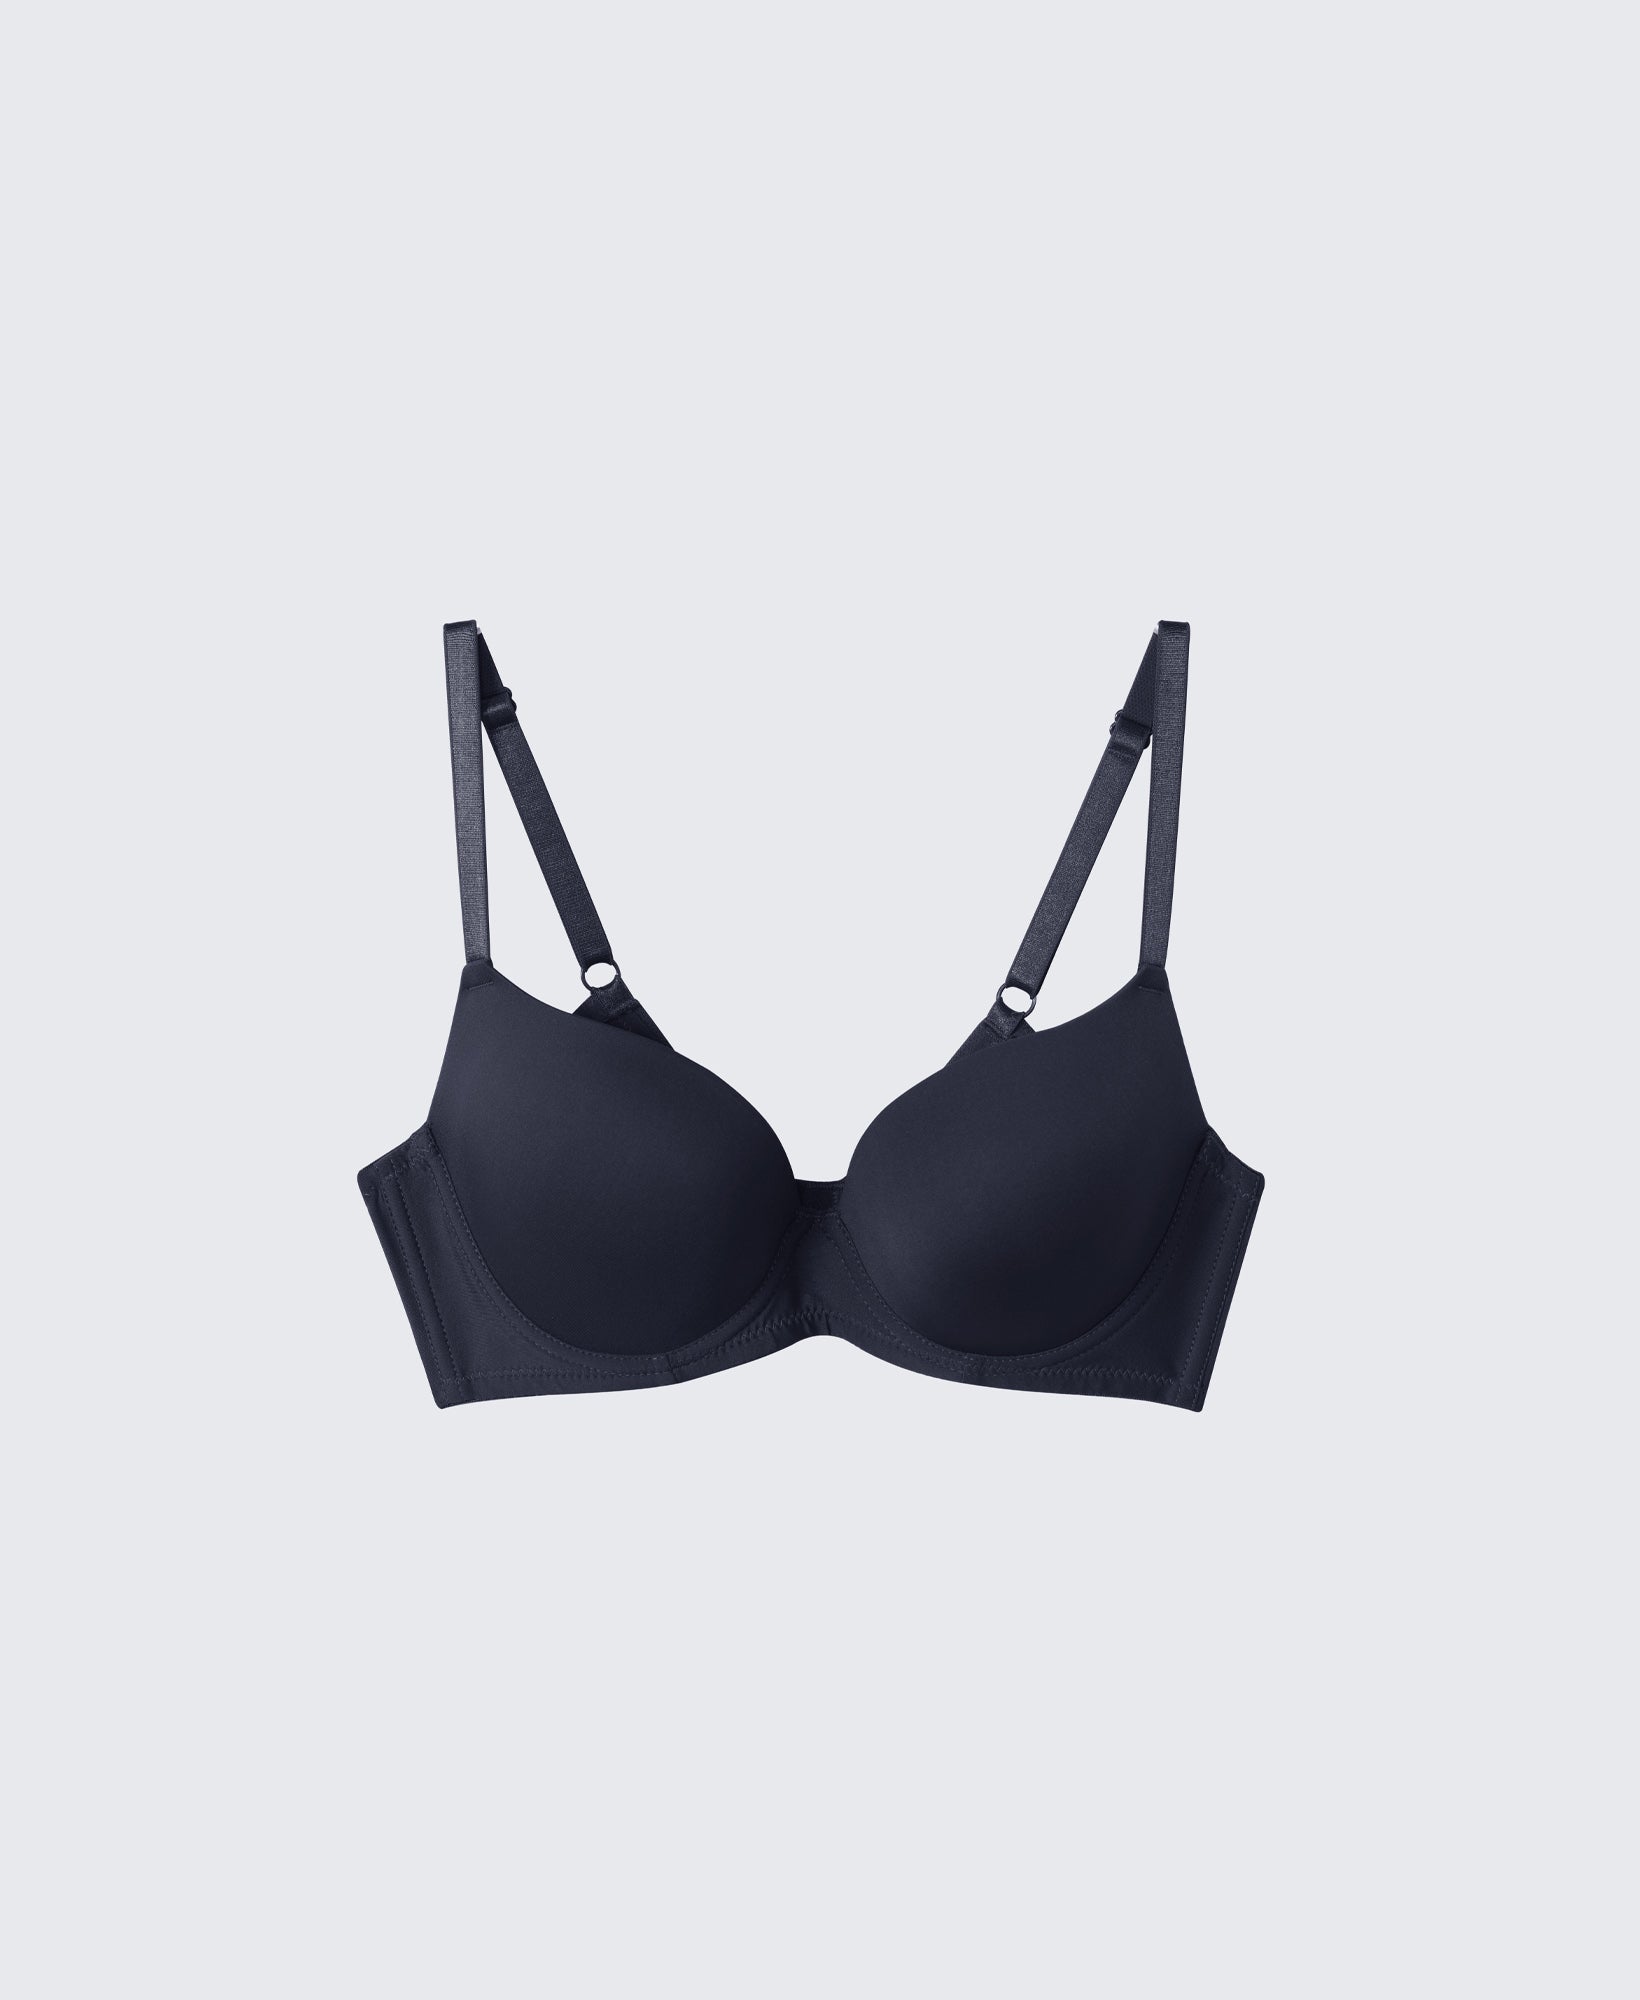 Pierre Cardin Lingerie Malaysia - Our push up bra lift you up securely with  or without strap and won't slip down. Complete your off shoulder tops or  dresses with strapless bra today.